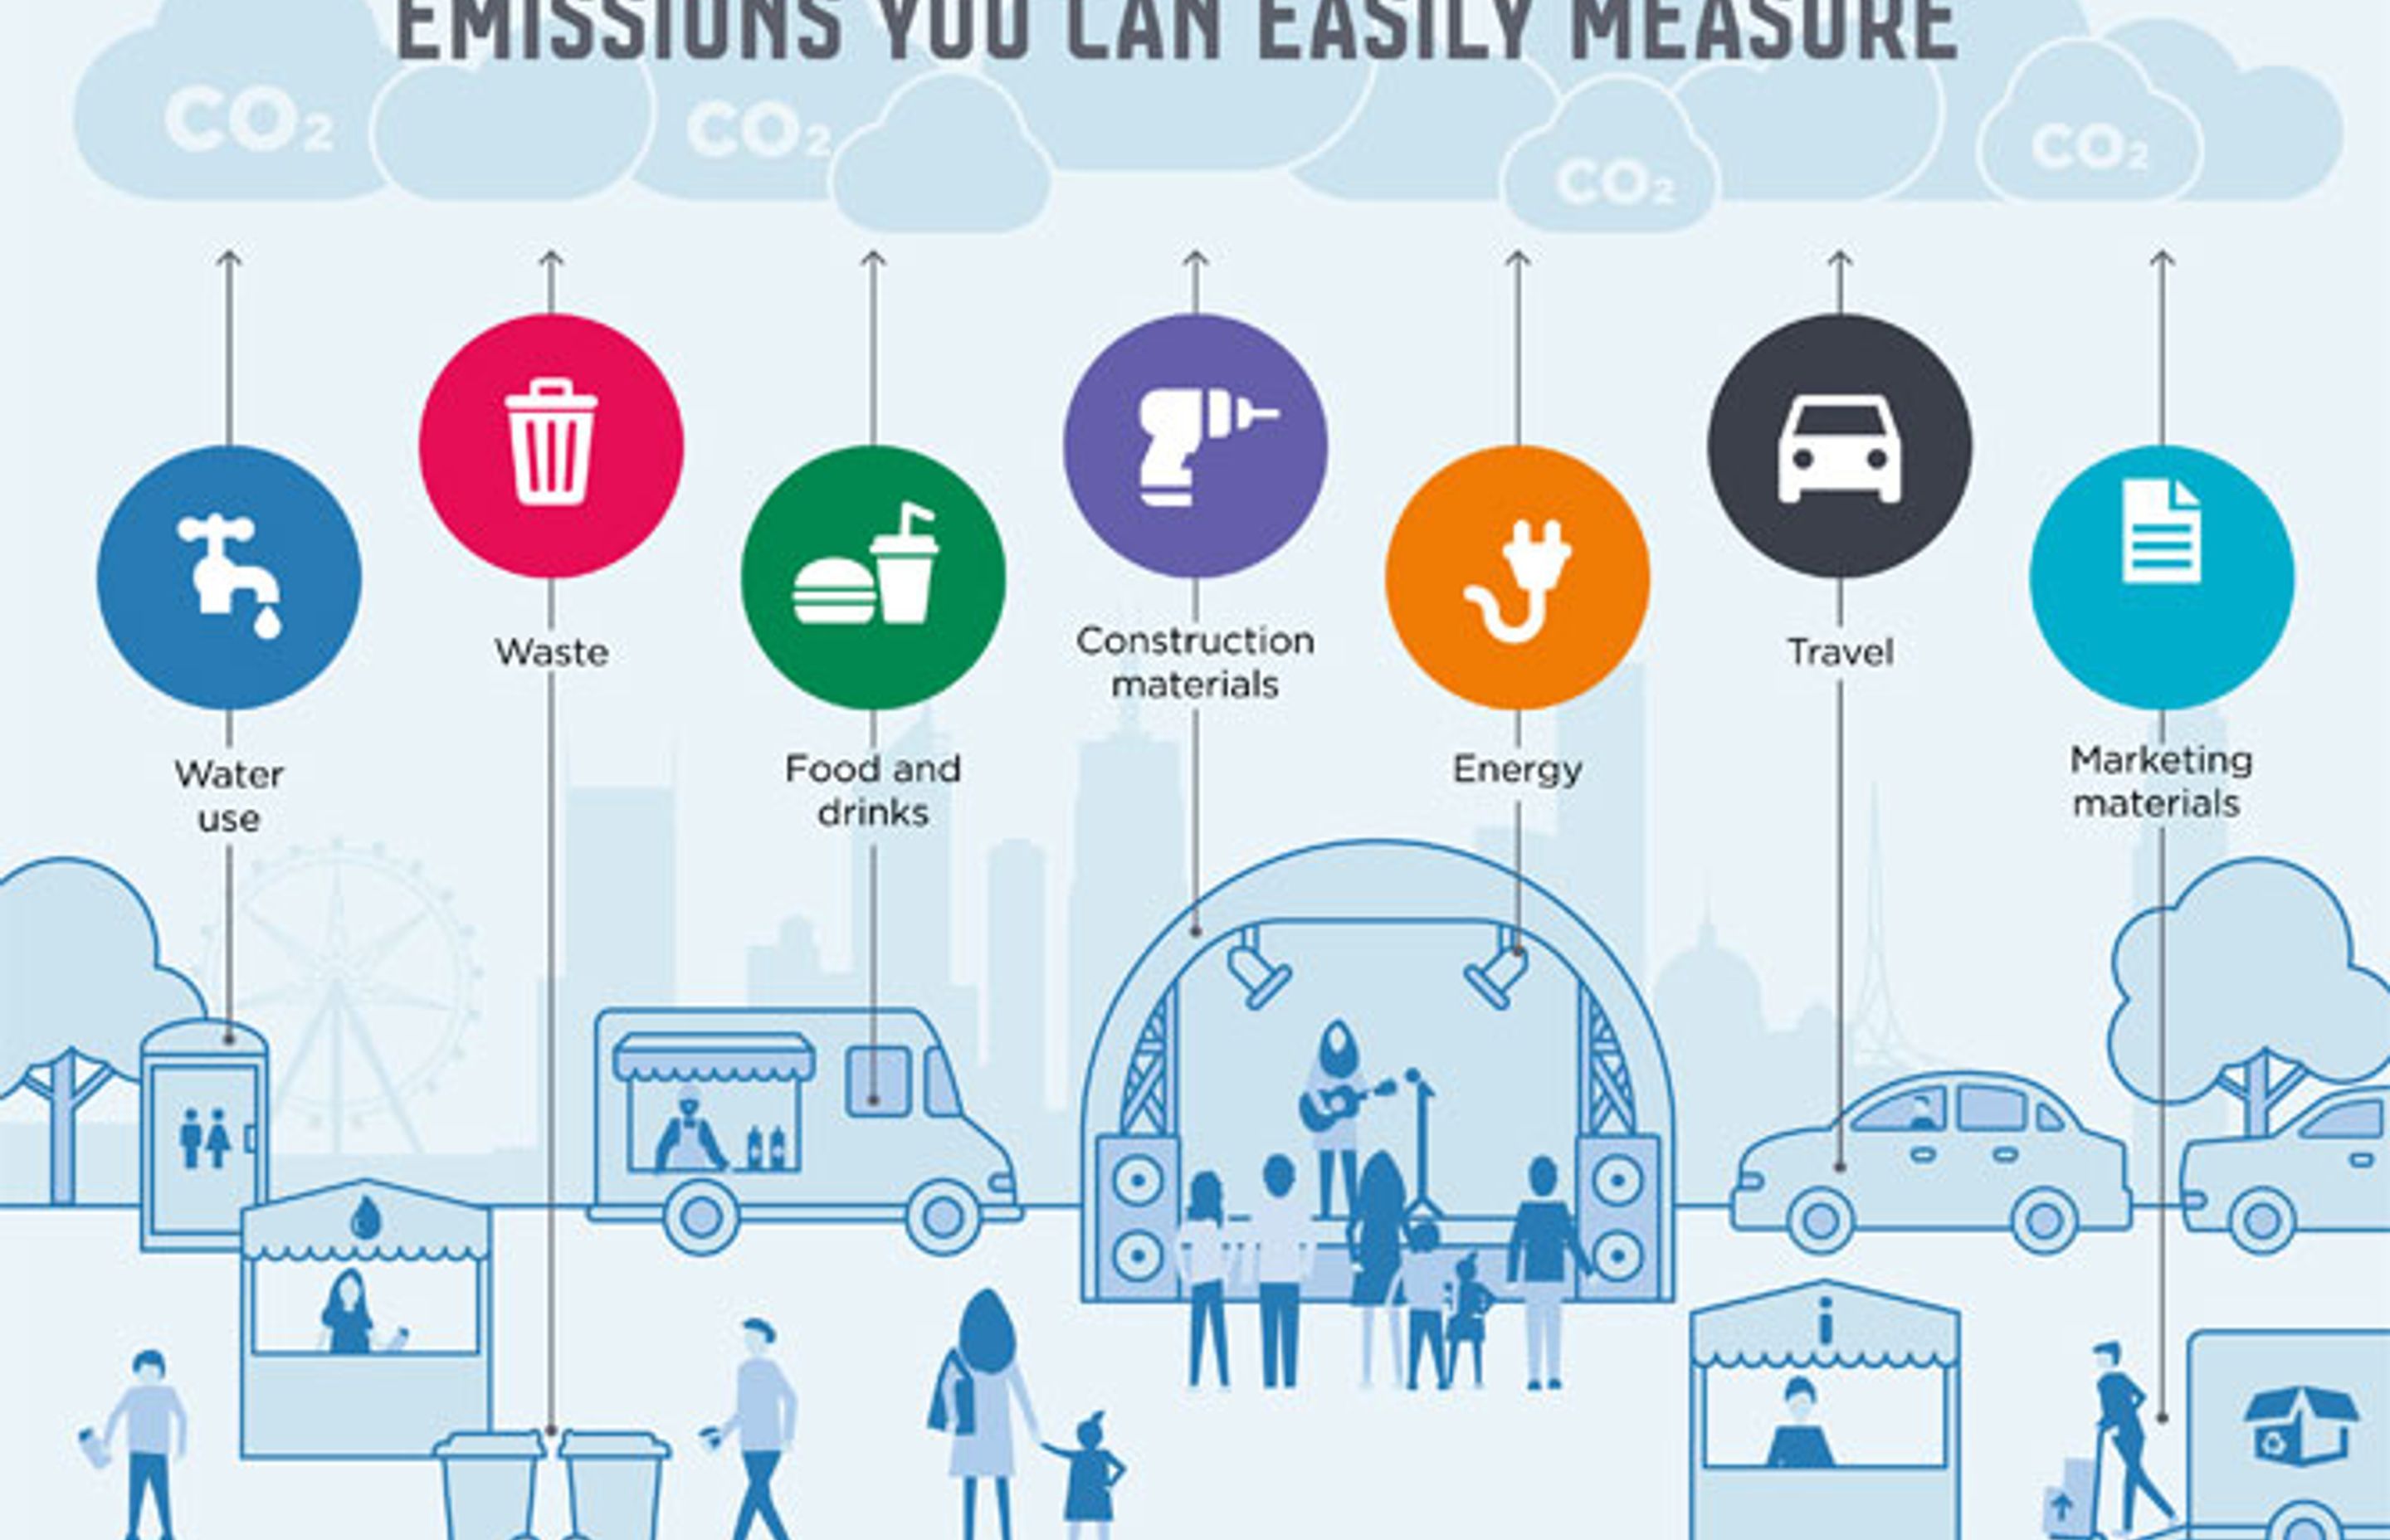 Figure 2: ‘Where do emissions come from?’ (Source: City of Melbourne)